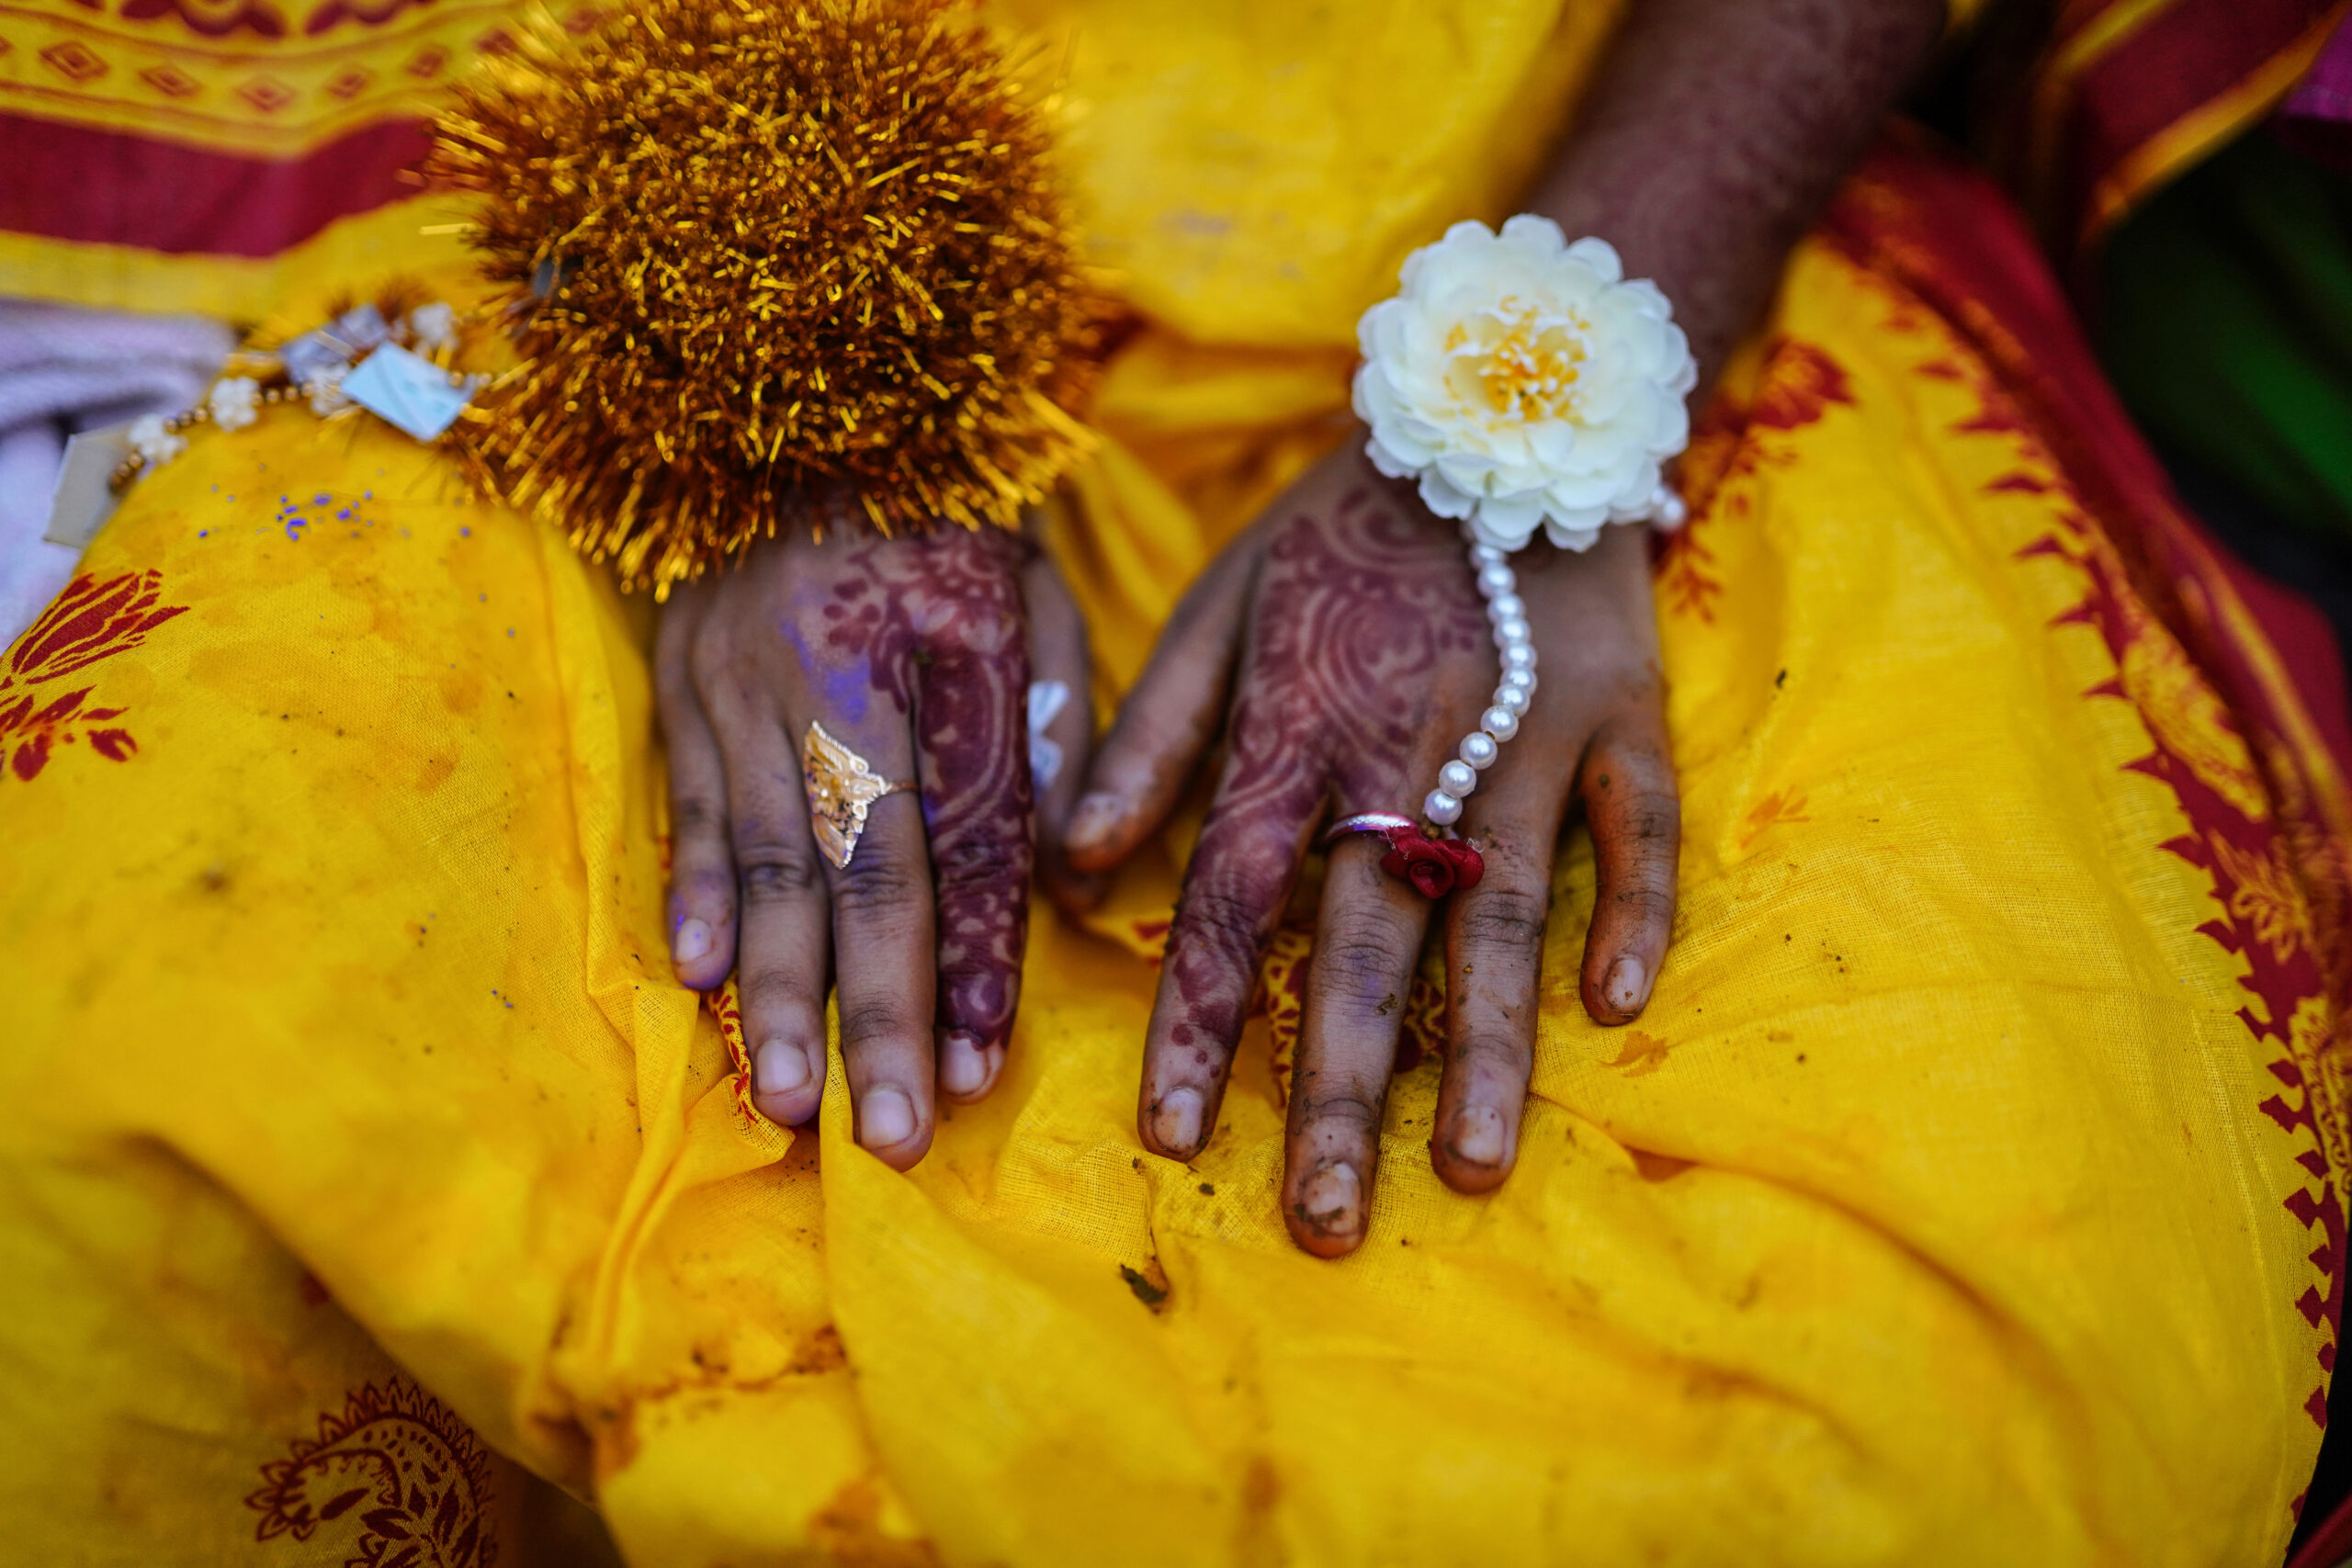 A woman's hands decorated on her wedding day at a village in Bangladesh